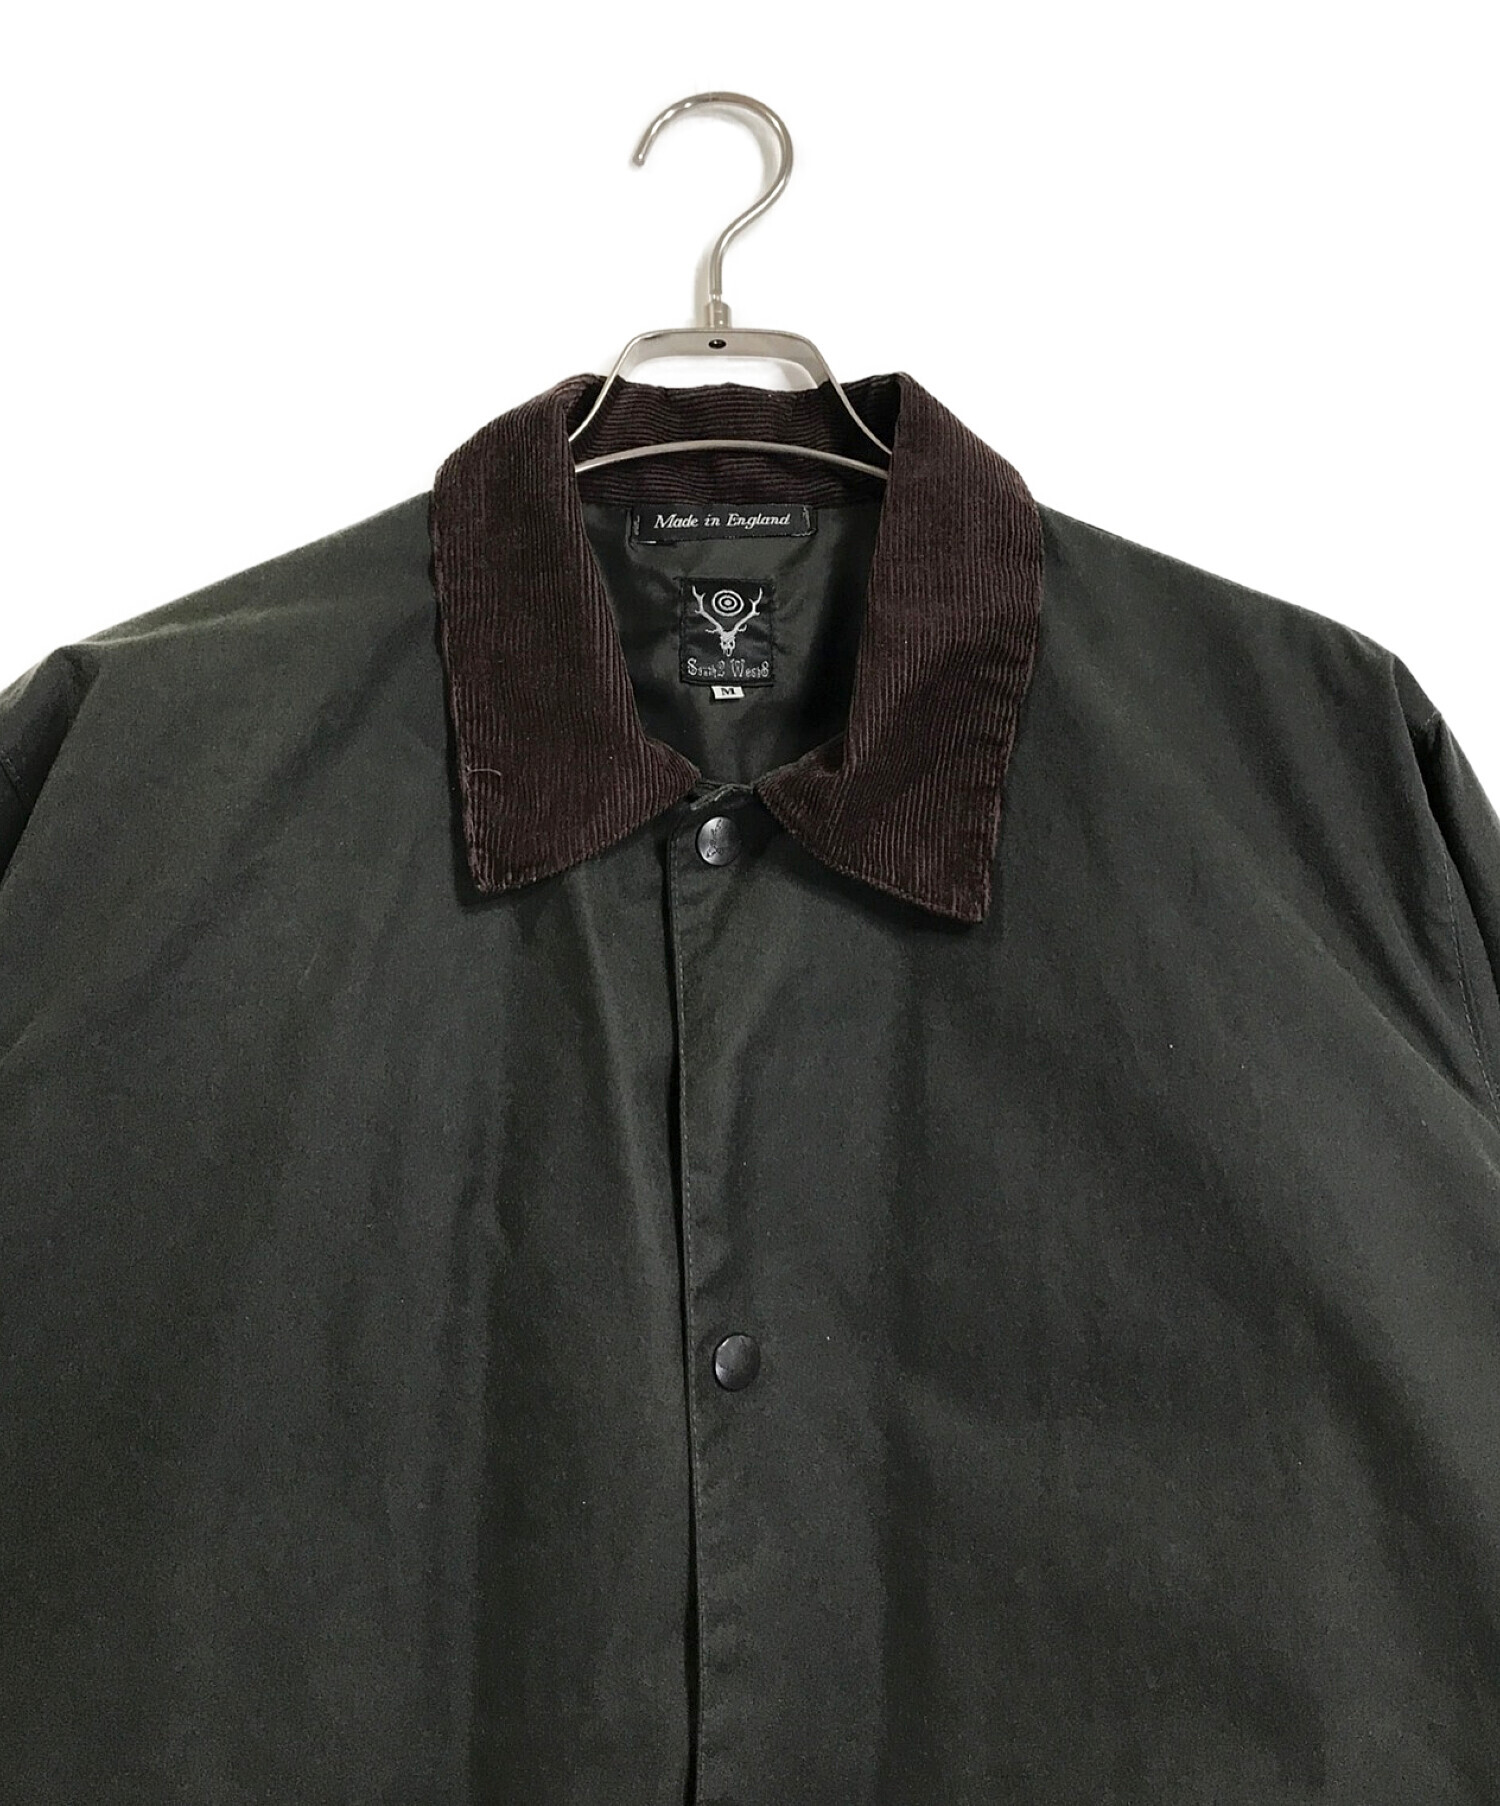 South2 West8 (サウスツー ウエストエイト) Waxed Cotton Coach Jacket カーキ サイズ:M